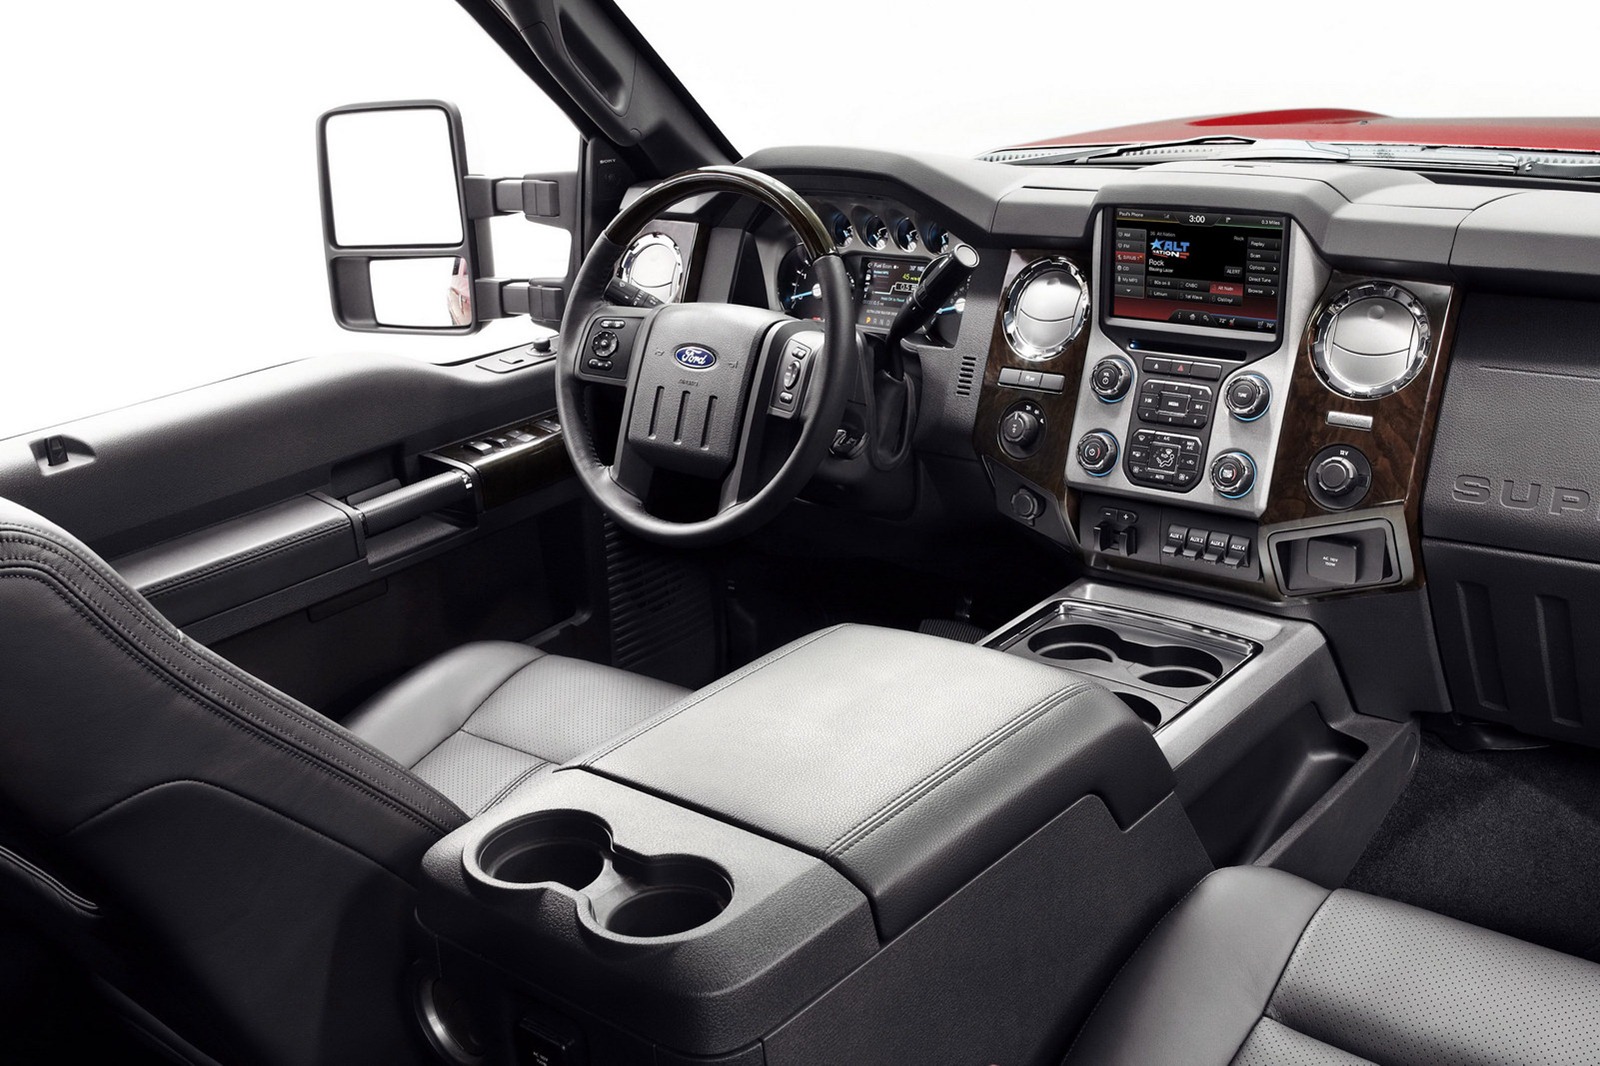 2013 Ford F-Series Super Duty Launched with Platinum Model [Video